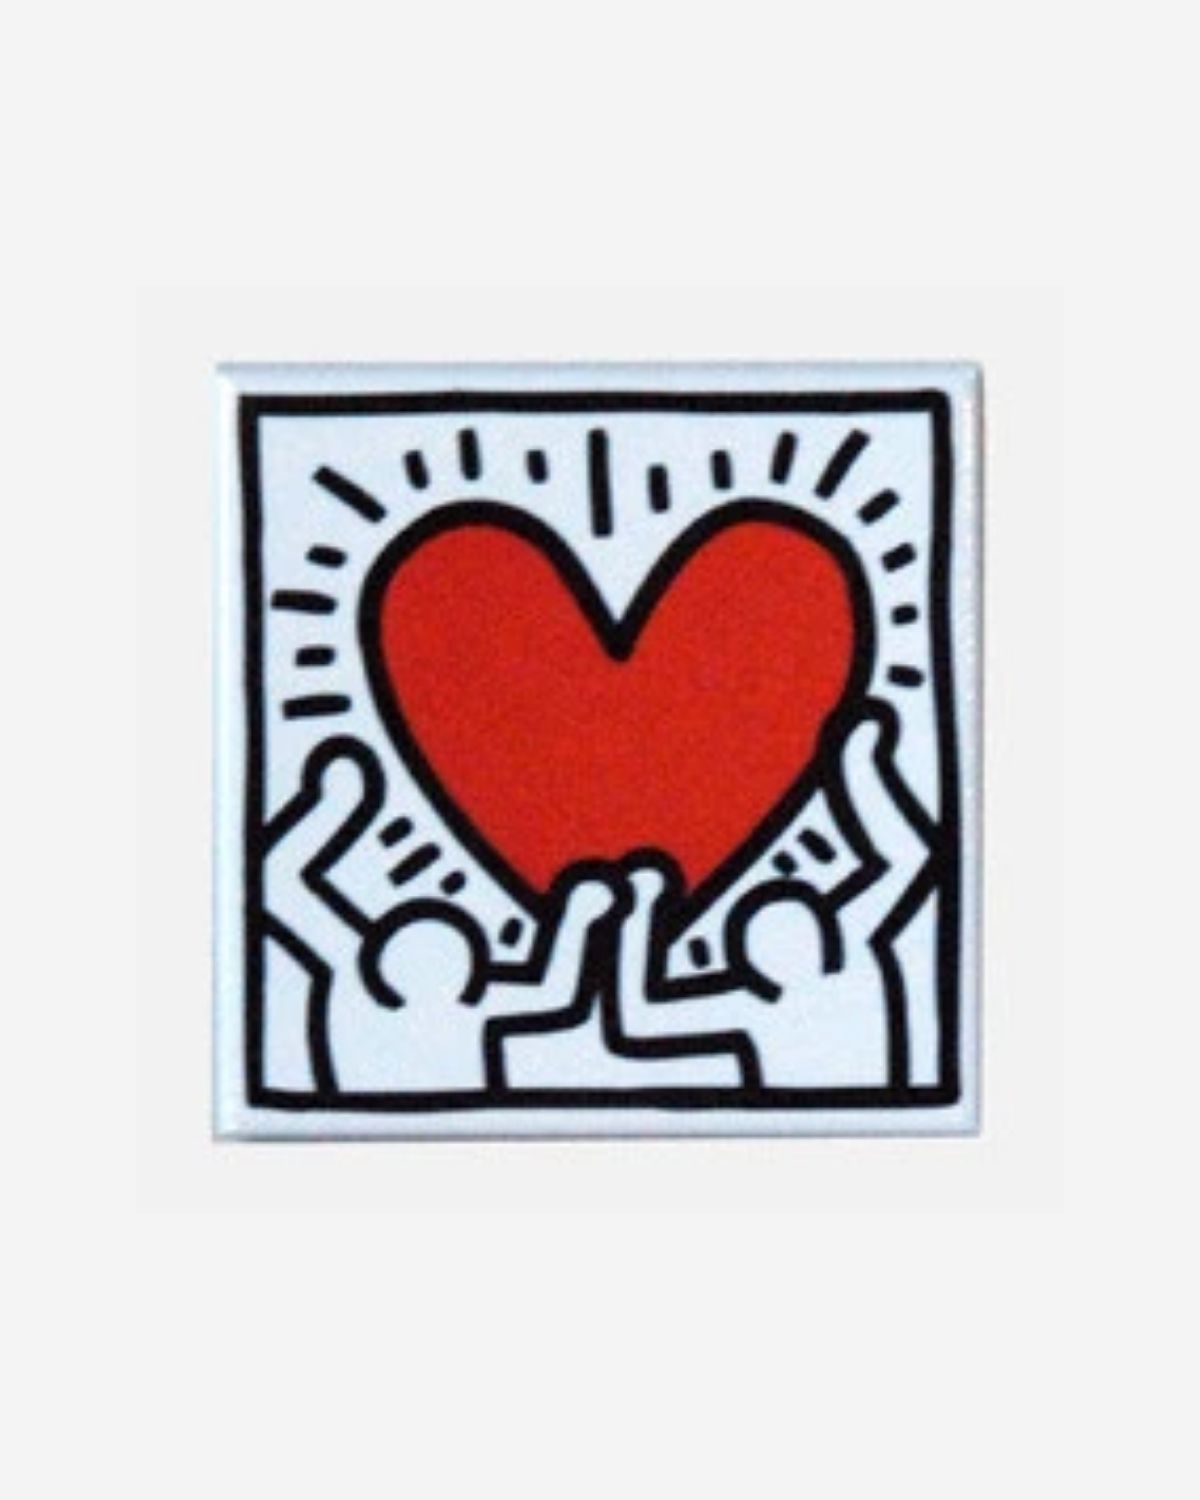 Keith Haring magnets